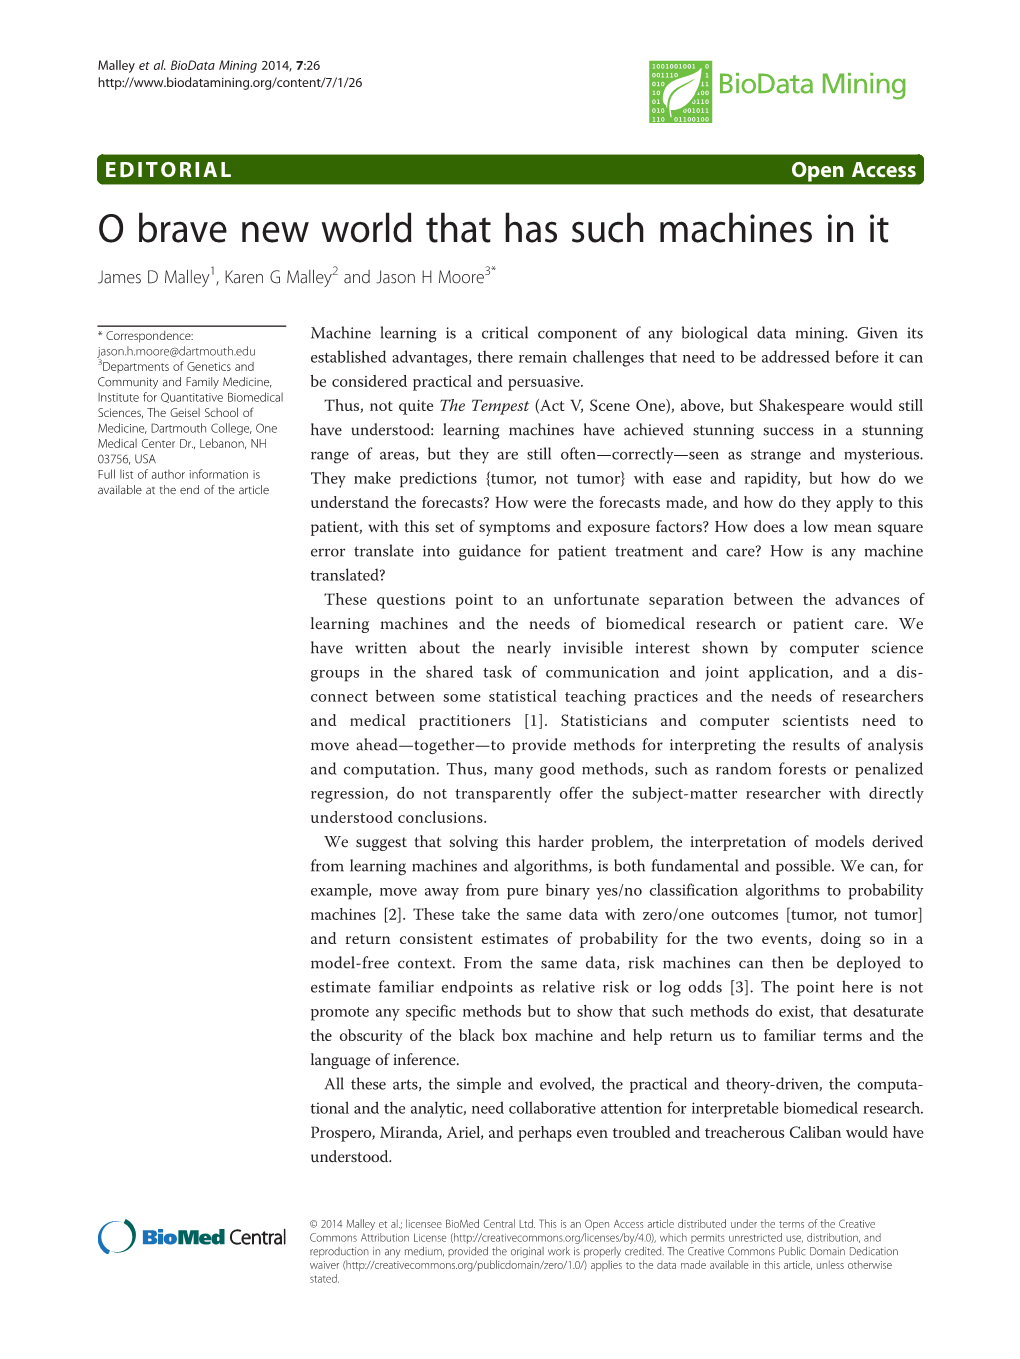 O Brave New World That Has Such Machines in It James D Malley1, Karen G Malley2 and Jason H Moore3*